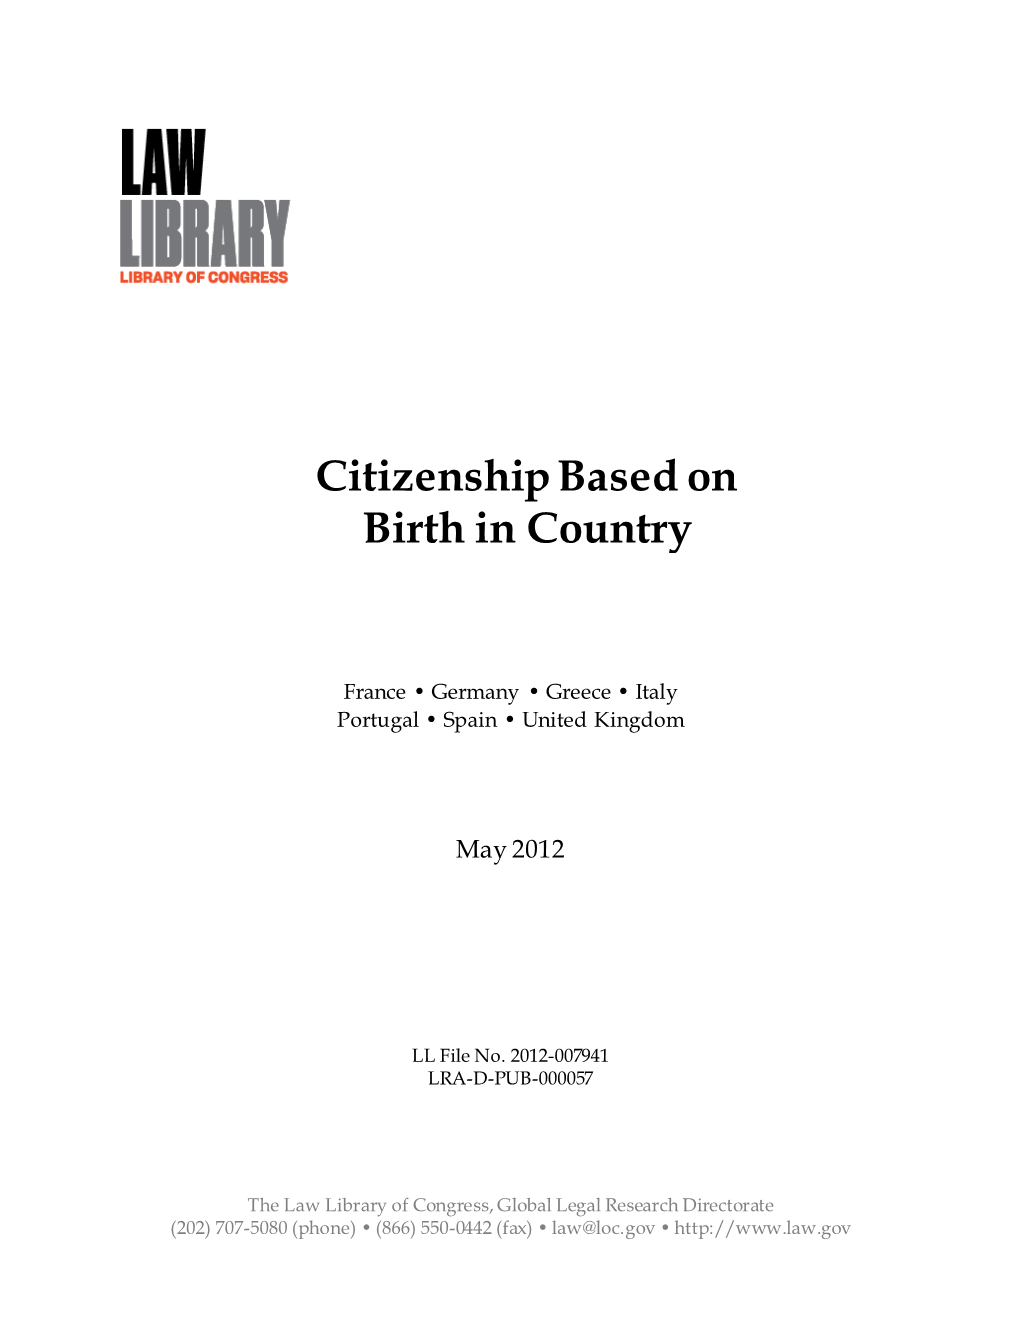 Citizenship Based on Birth in Country